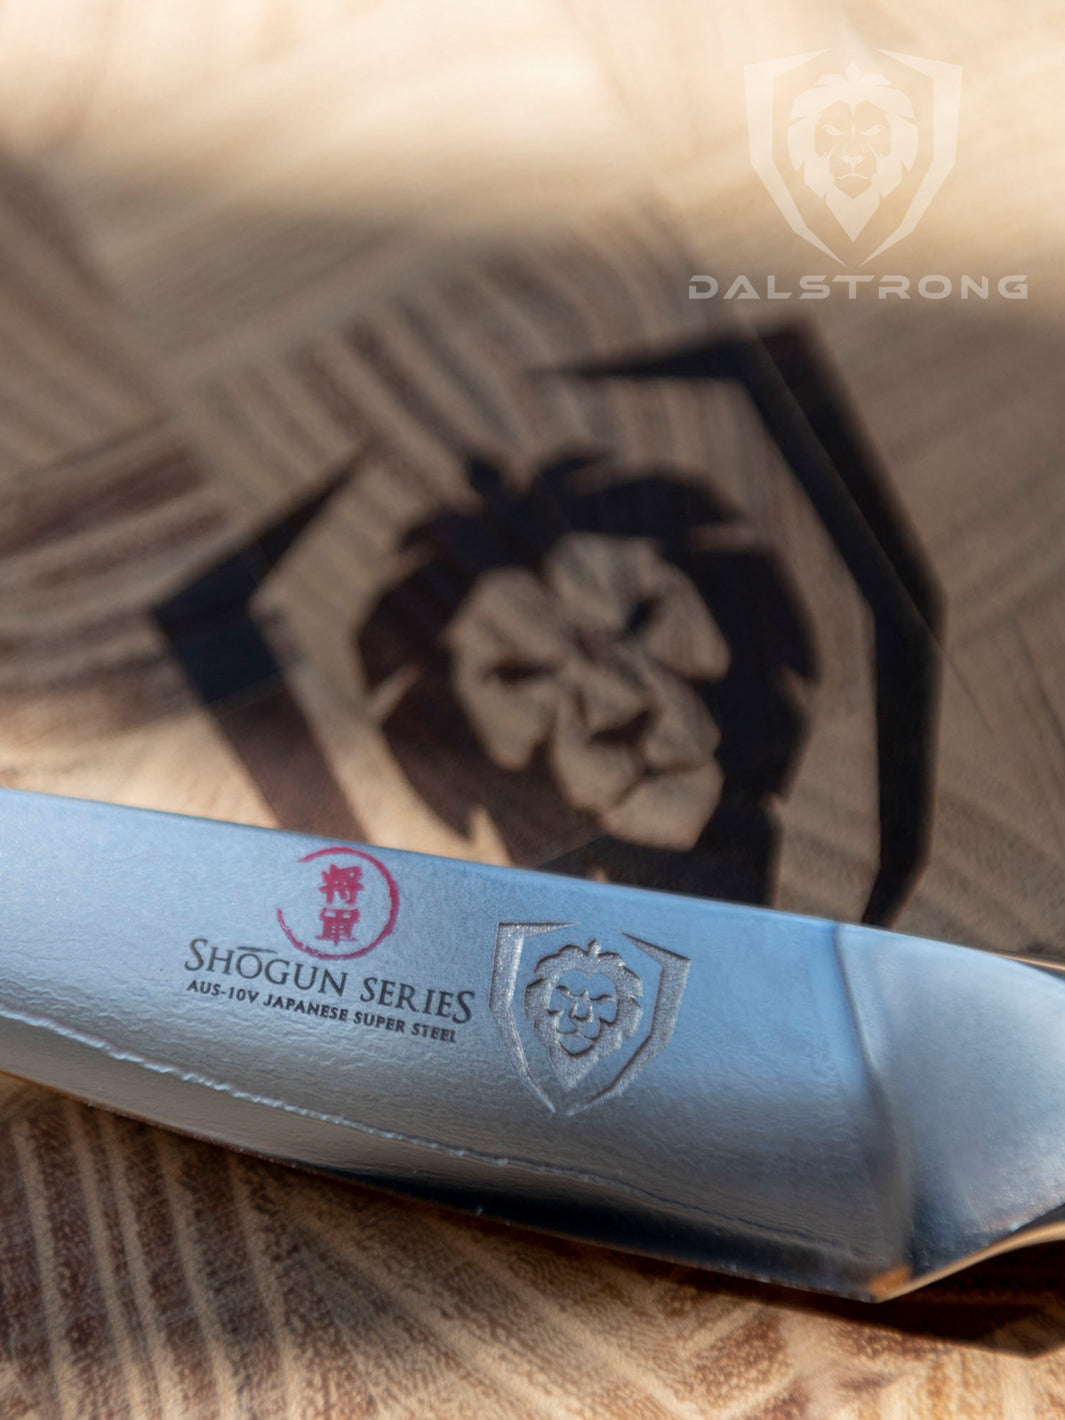 Dalstrong shogun series 3.5 inch paring knife with crimson red handle showcasing it's series and dalstrong logo.